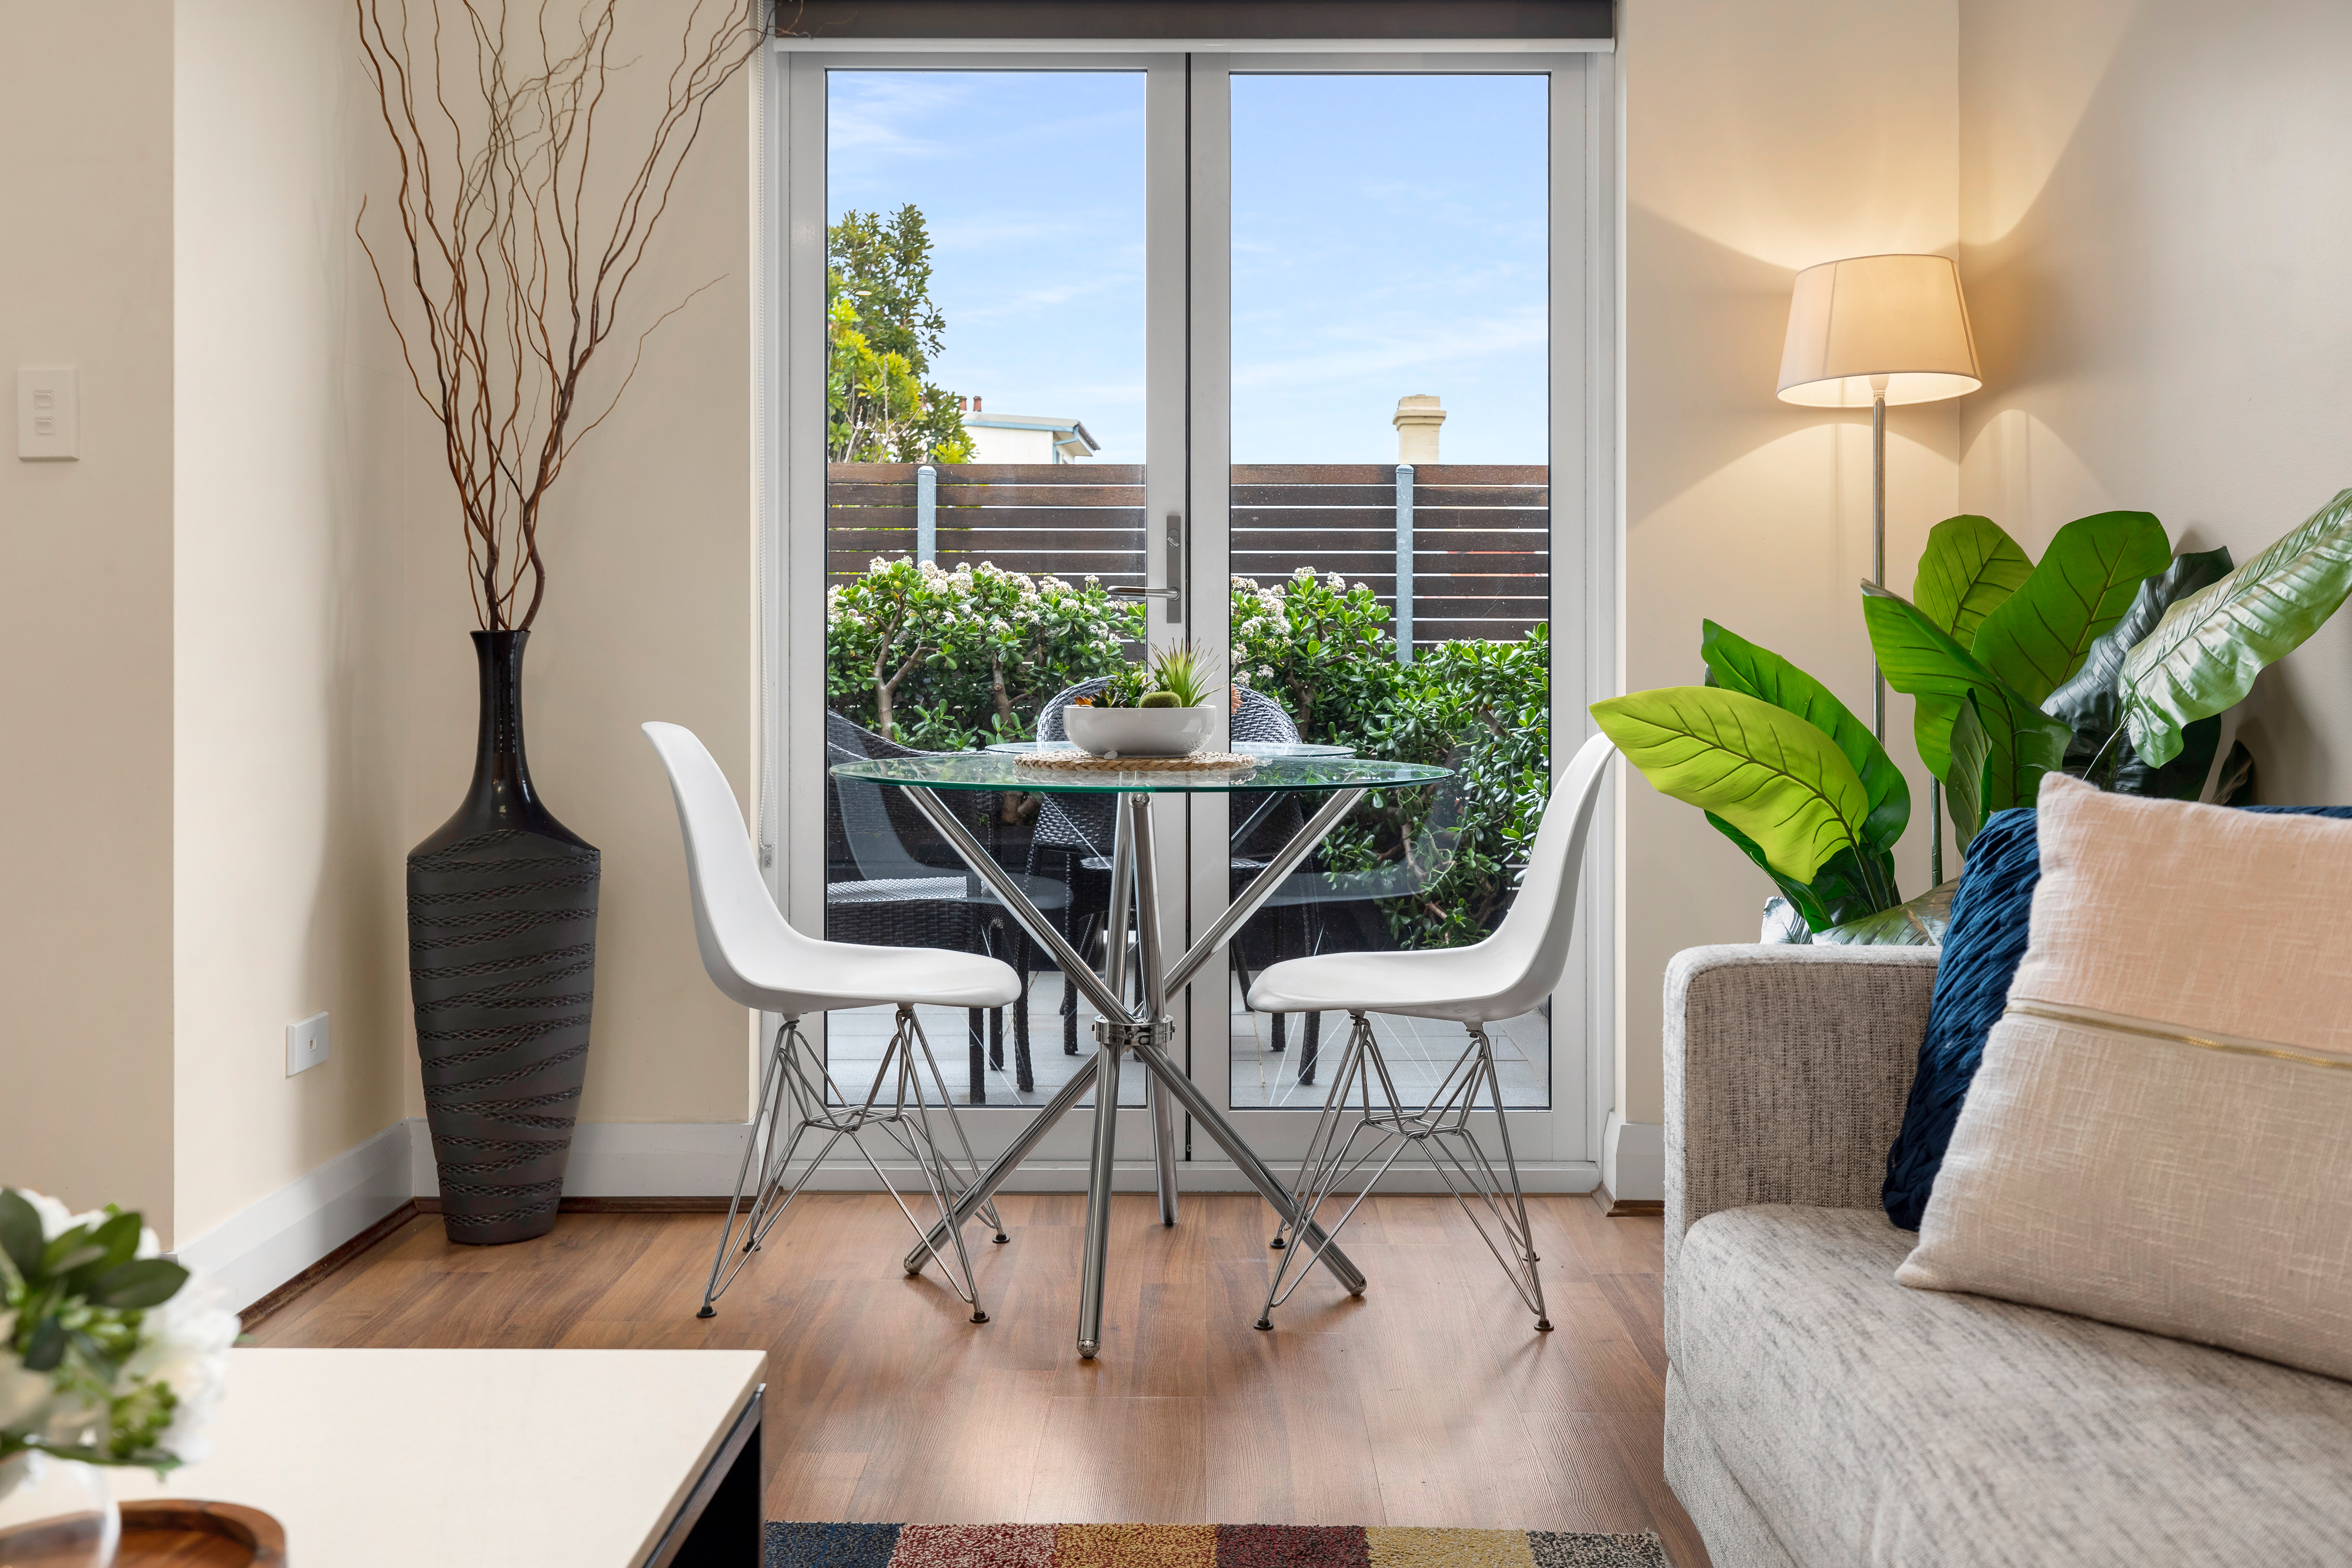 Dining - One Bedroom Apartment - Urban Rest - The Banq Apartments - Sydney